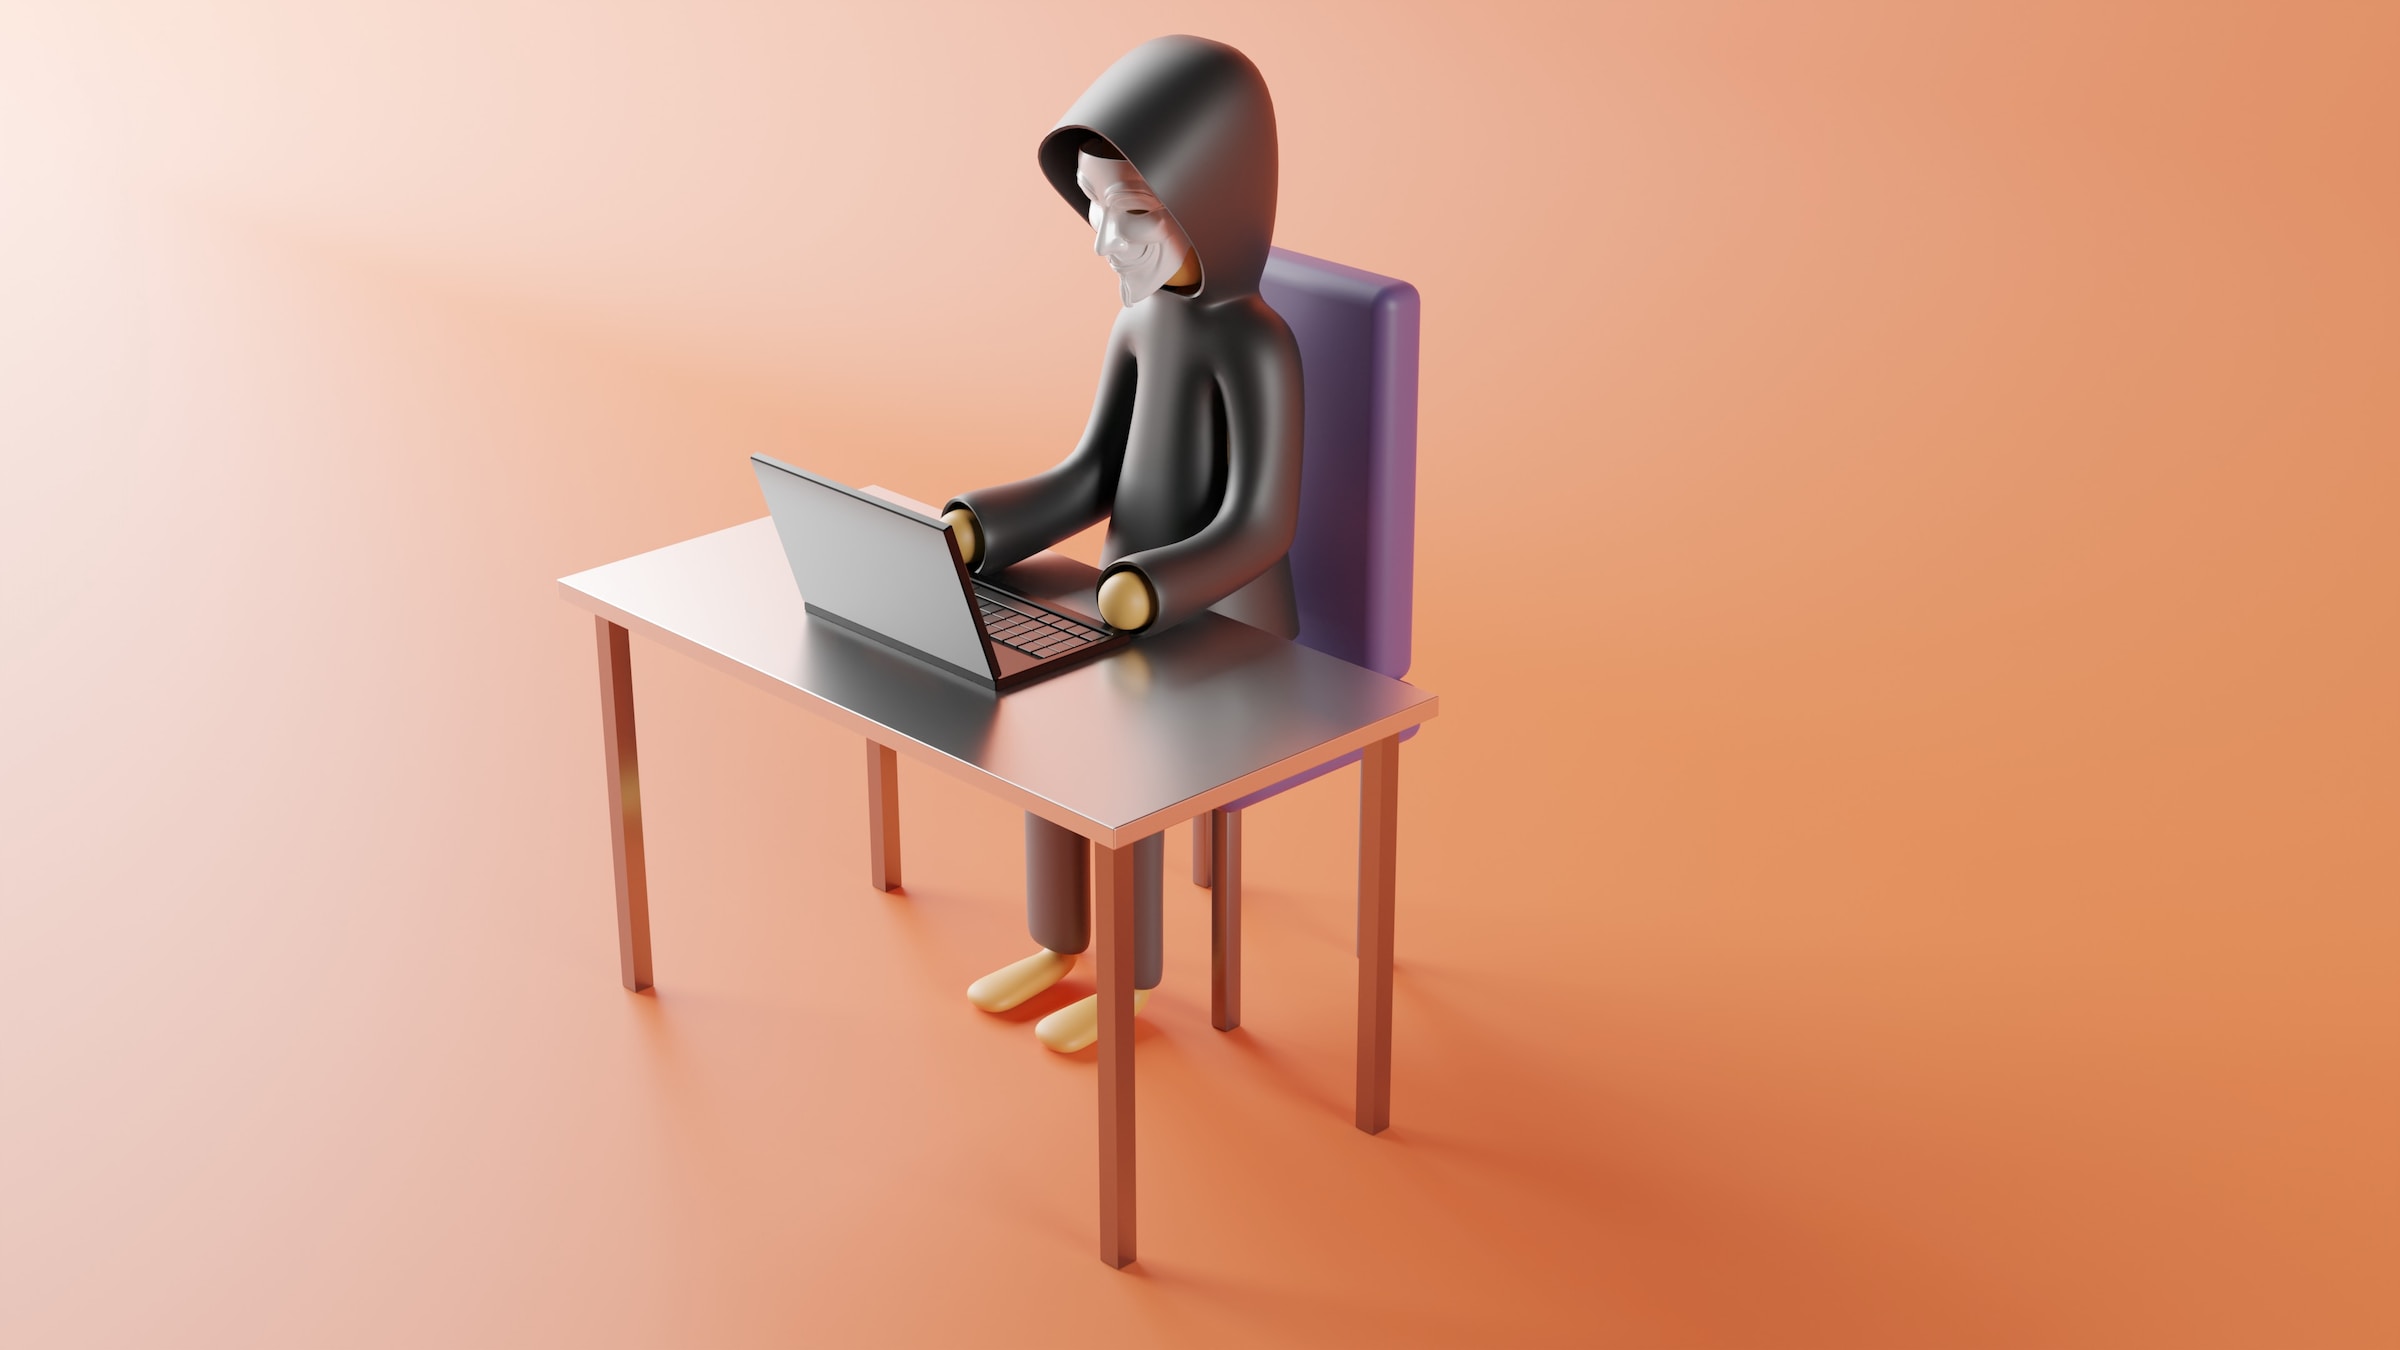 animated vector of man sitting with a mask on, on a table with laptop